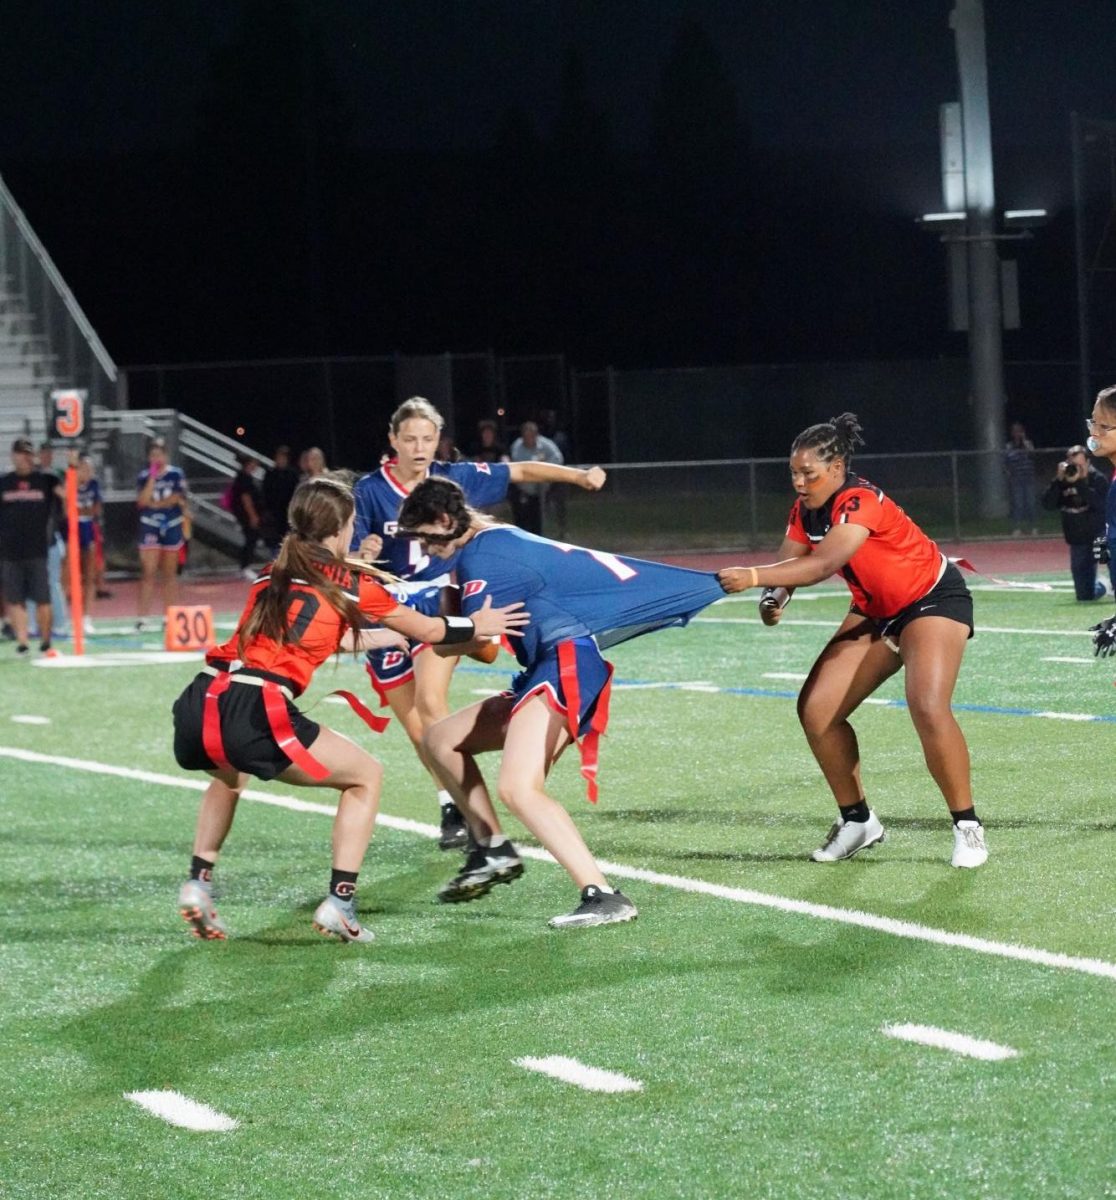 Sophomore+Olivia+Horton%2C+far+right%2C+pulls+a+Dublin+player+by+her+jersey+as+teammate+senior+Lauren+Grgurina%2C+left%2C+tries+to+pull+the+flag+during+the+Grizzlies+24-0+victory+on+Sept.+12.+Cal+is+9-1+overall+and+7-0+in+EBAL+play+so+far+this+season.